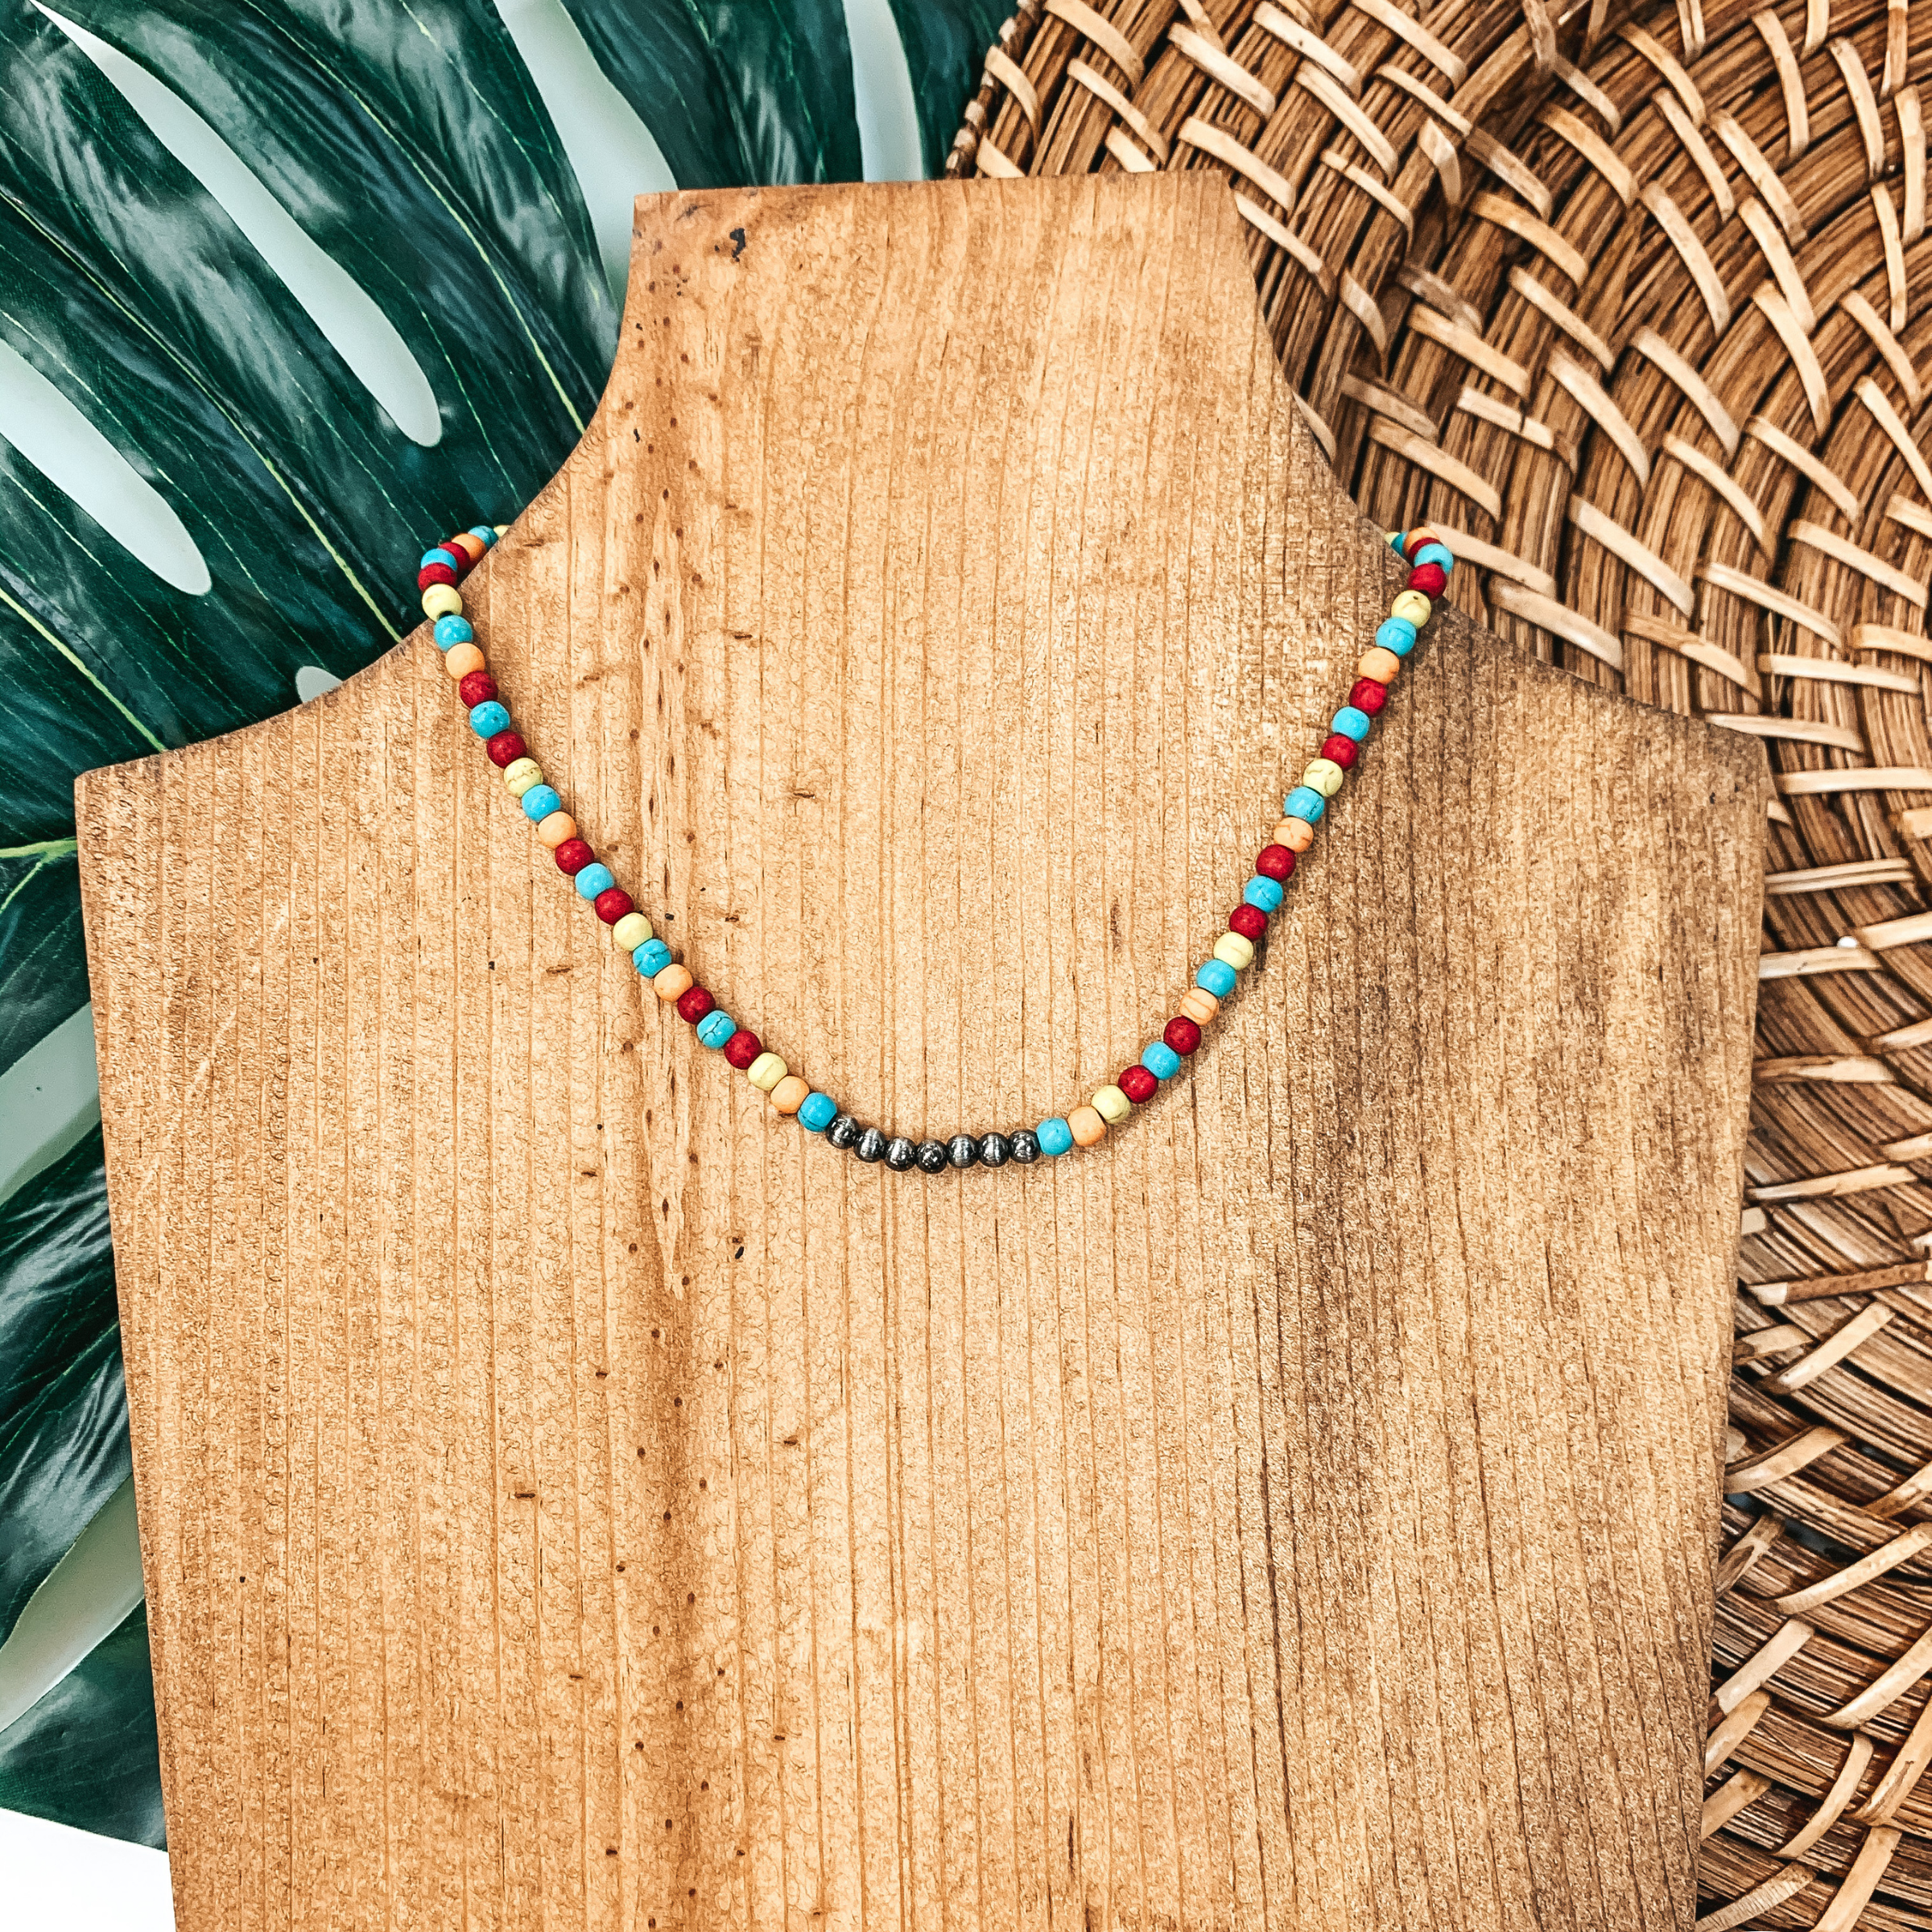 Small Stone Beaded Necklace with Navajo Inspired Beads In Multi - Giddy Up Glamour Boutique